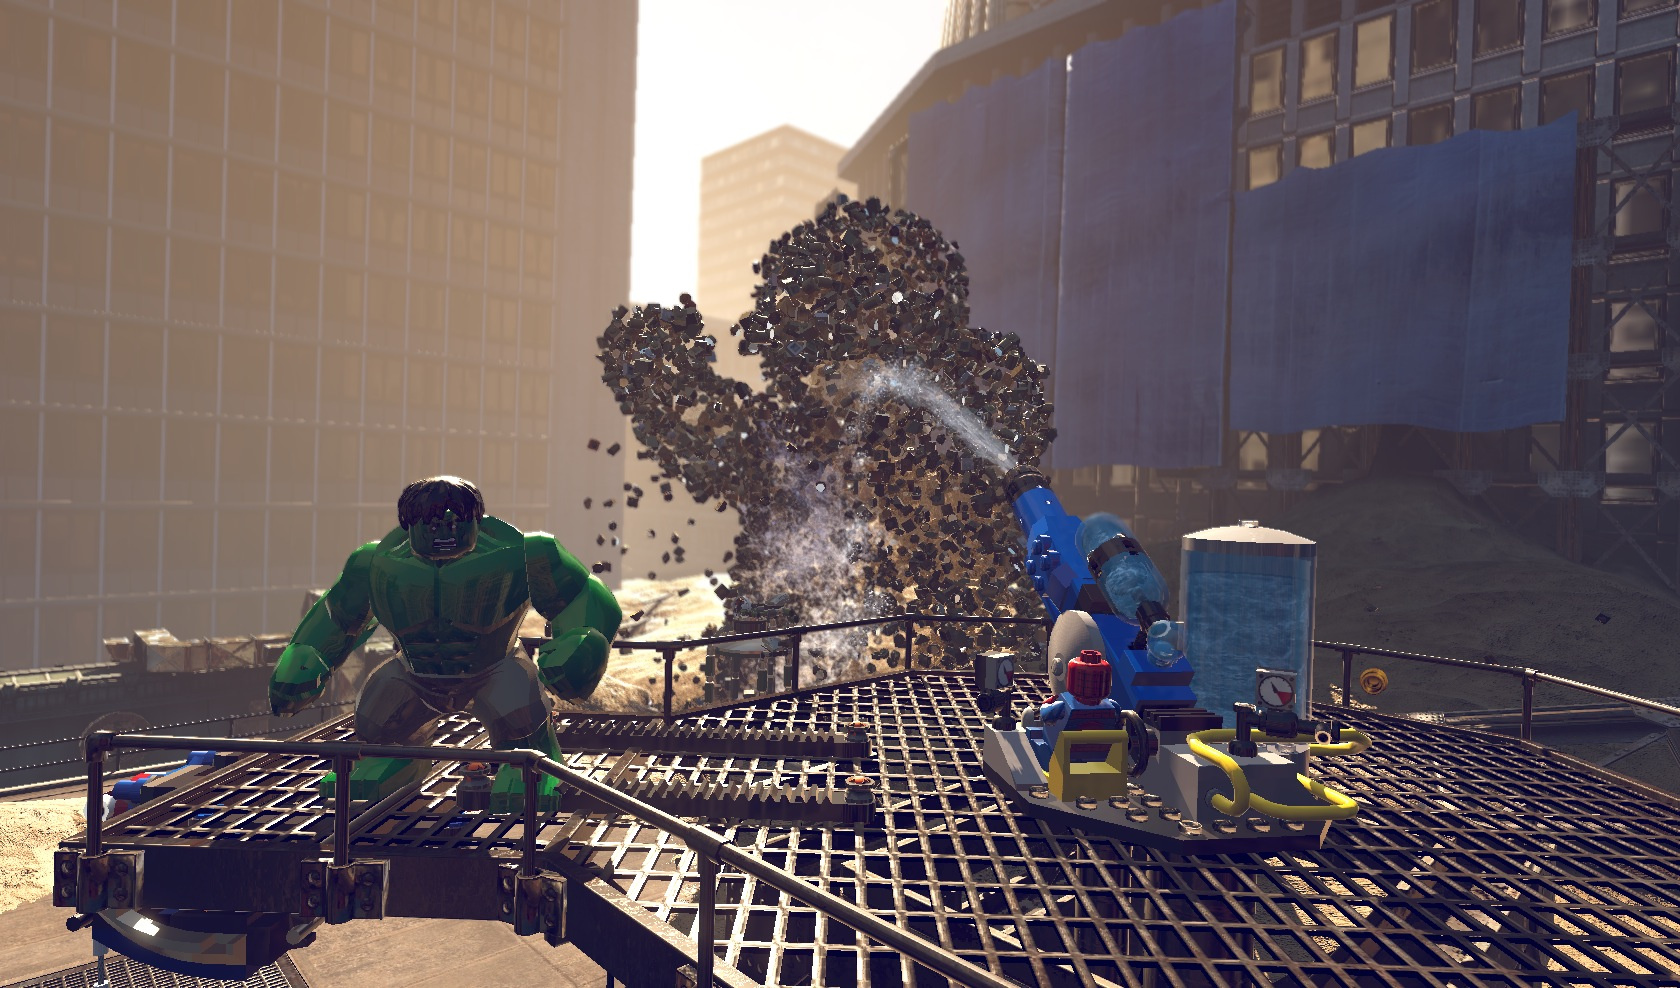 PC / Computer - LEGO Marvel Super Heroes - Effects - The Textures Resource